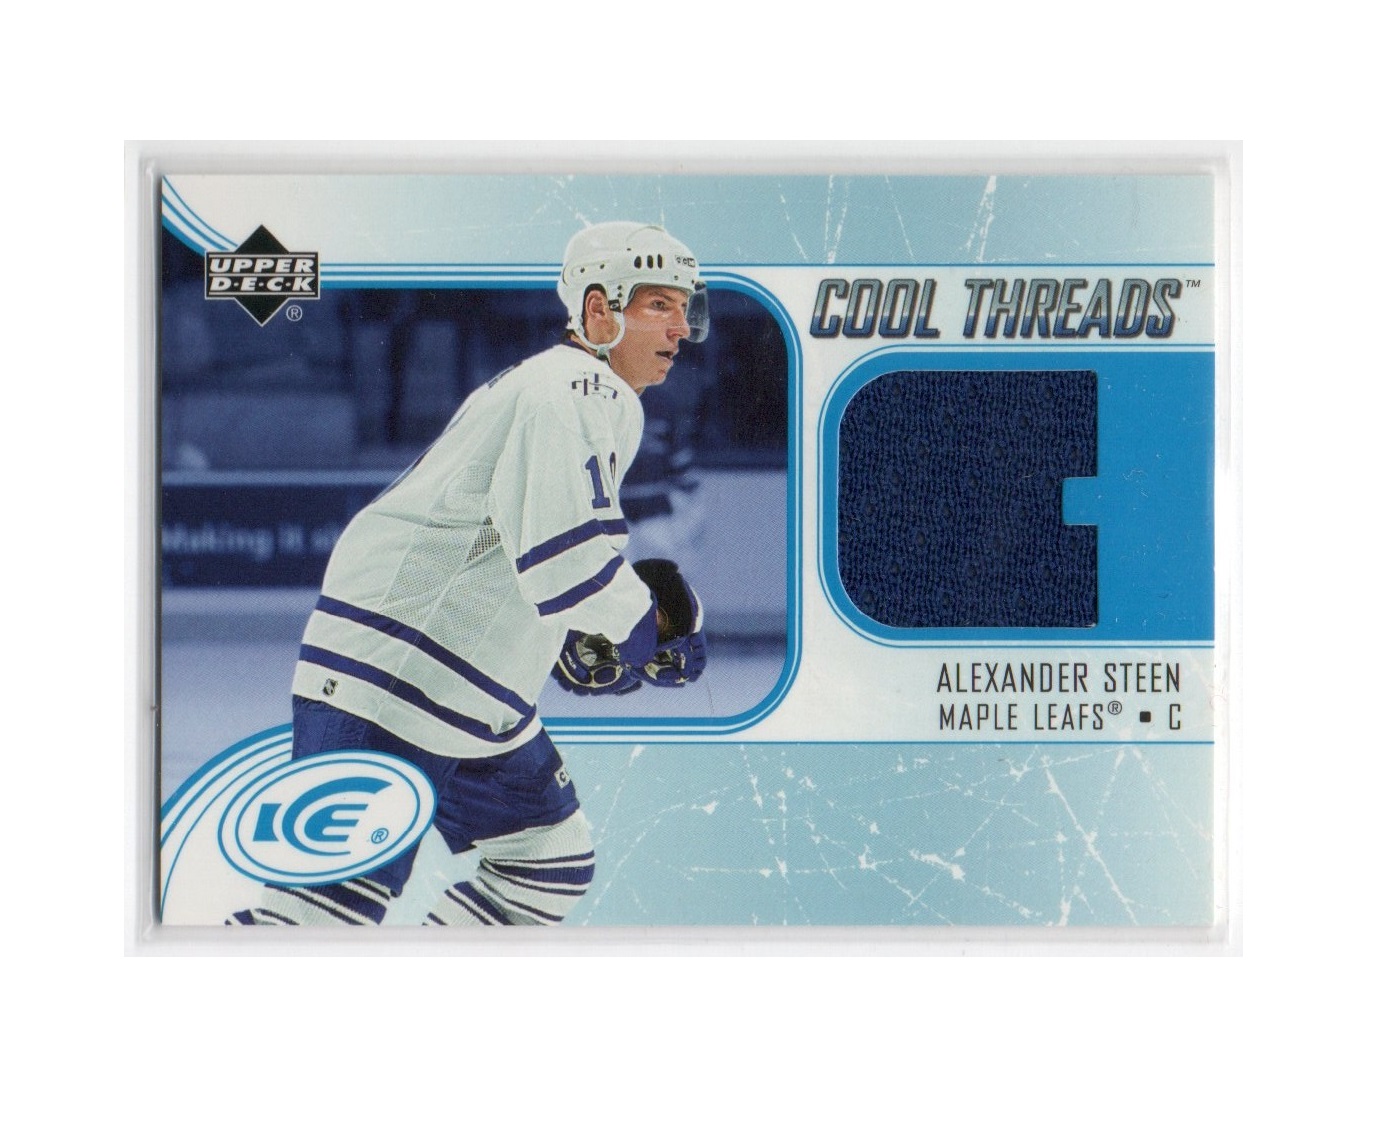 2005-06 Upper Deck Ice Cool Threads #CTAS Alexander Steen (40-X152-GAMEUSED-MAPLE LEAFS)